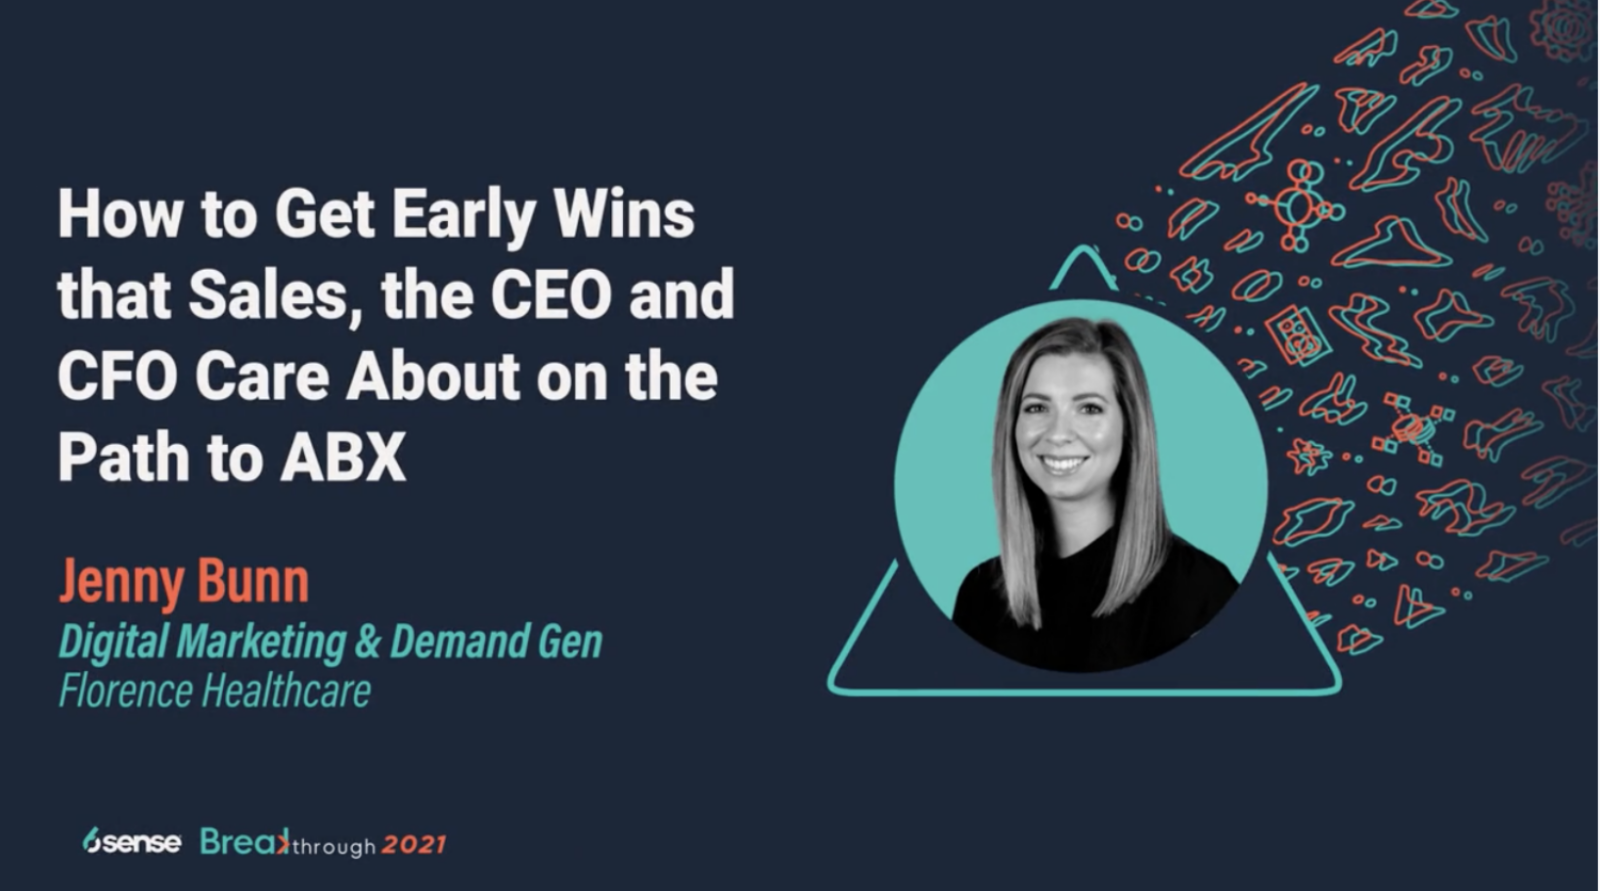 How to Get Early Wins that Sales, the CEO and CFO Care About on the Path to ABX